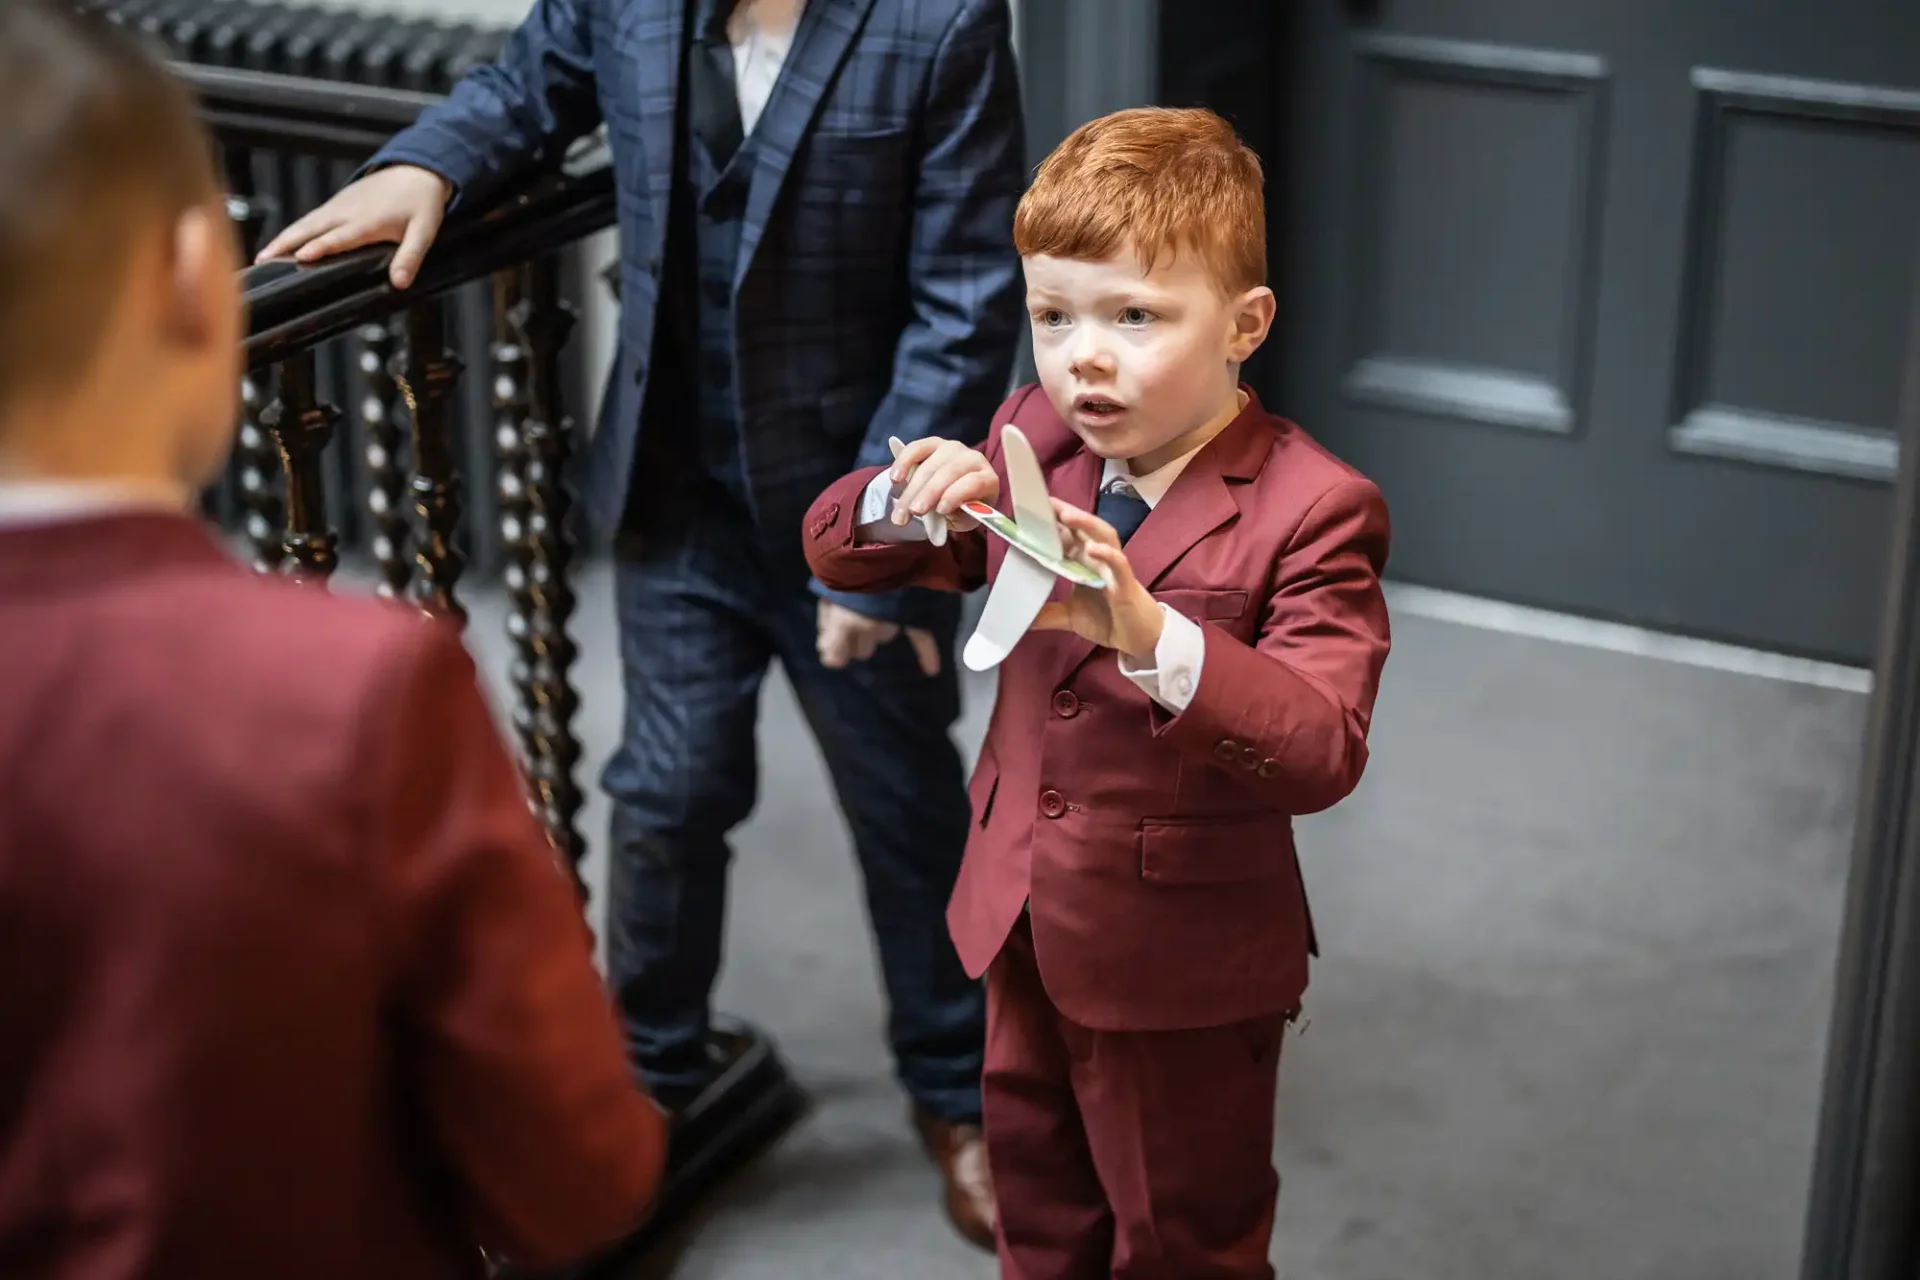 A young boy in a burgundy suit holding a paper airplane indoors, talking to another boy, with an adult in the background.